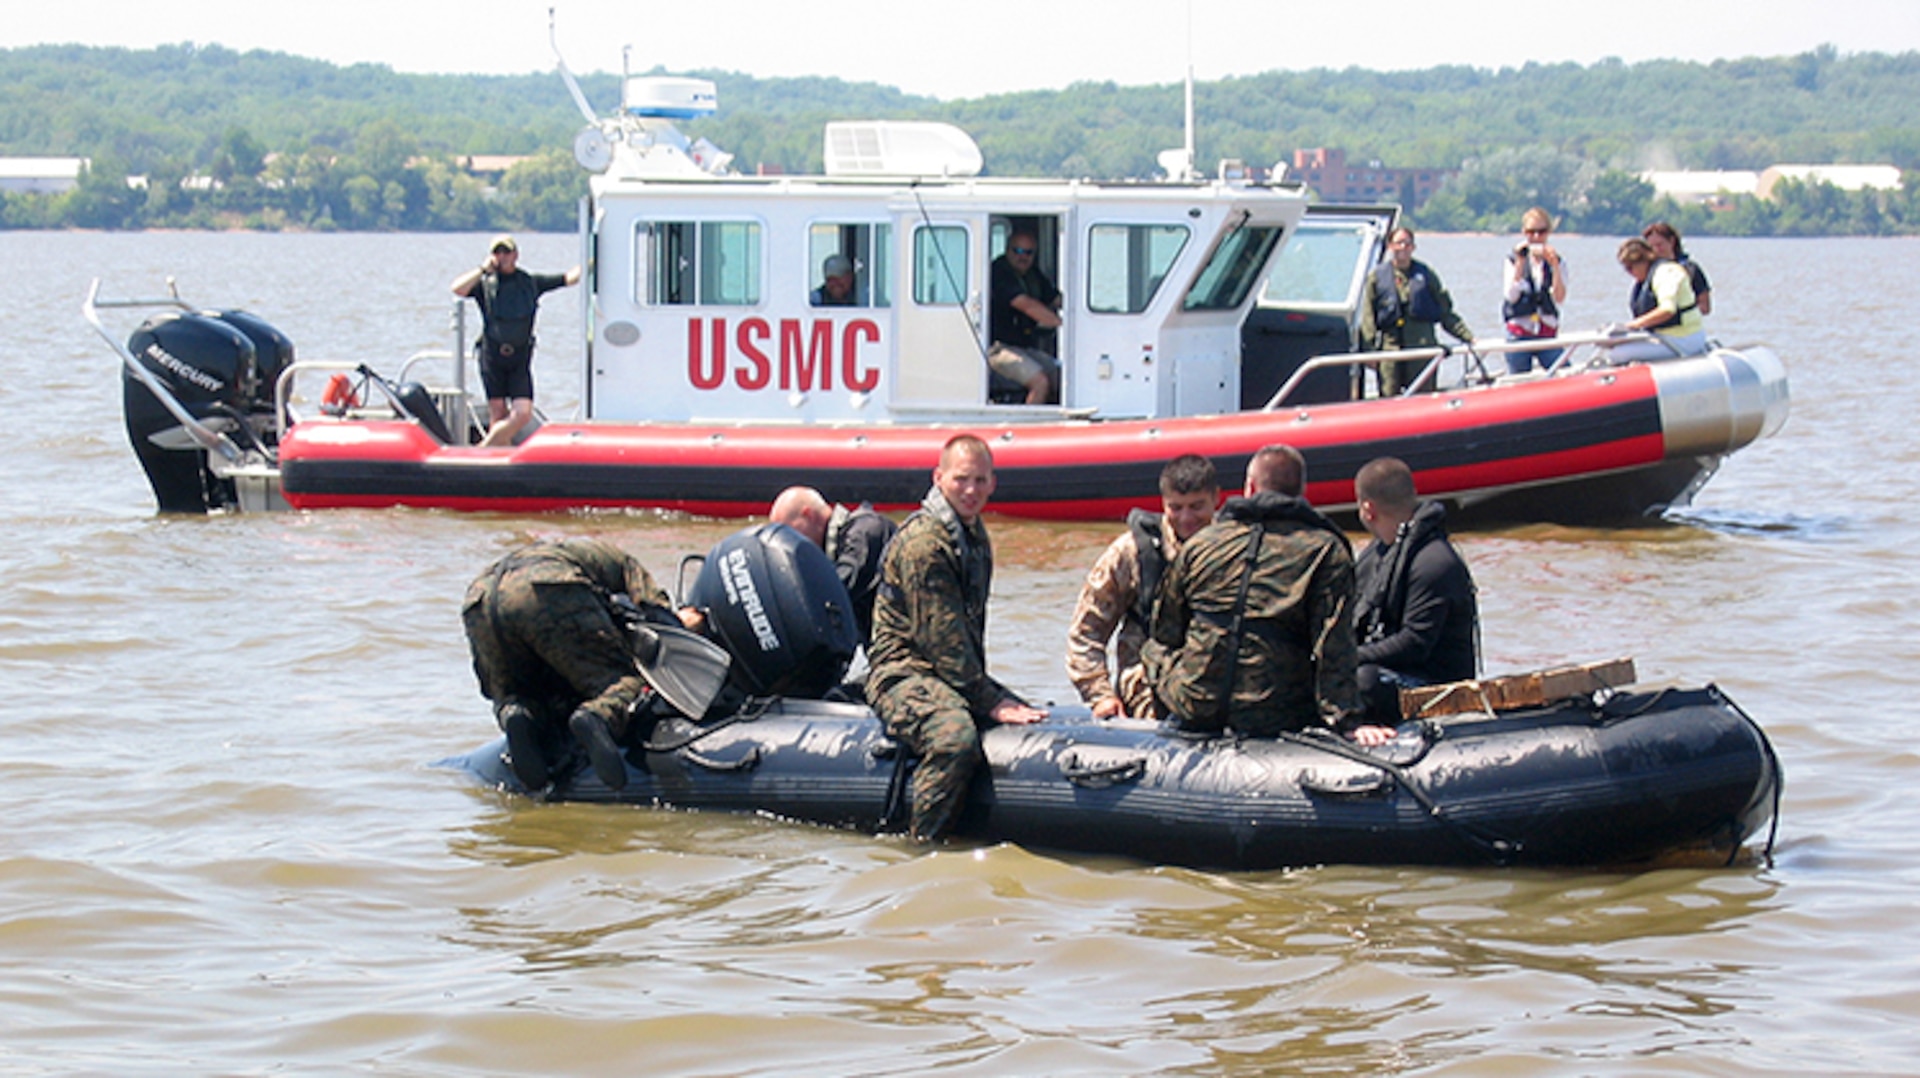 Marines from Marine Corps Systems Command conduct helocasting of the Zodiac F470 near Quantico, Va., while an Open Water Safety Craft floats nearby. The OWSC has been in service since 2006, and is used as an emergency vessel during waterborne training operations. Marine Corps Systems Command is working with Marine Corps Logistics Command and the National Marine Center to refurbish 28 boats in the Corps inventory. (U.S. Marine Corps photo by Jake Feeney)